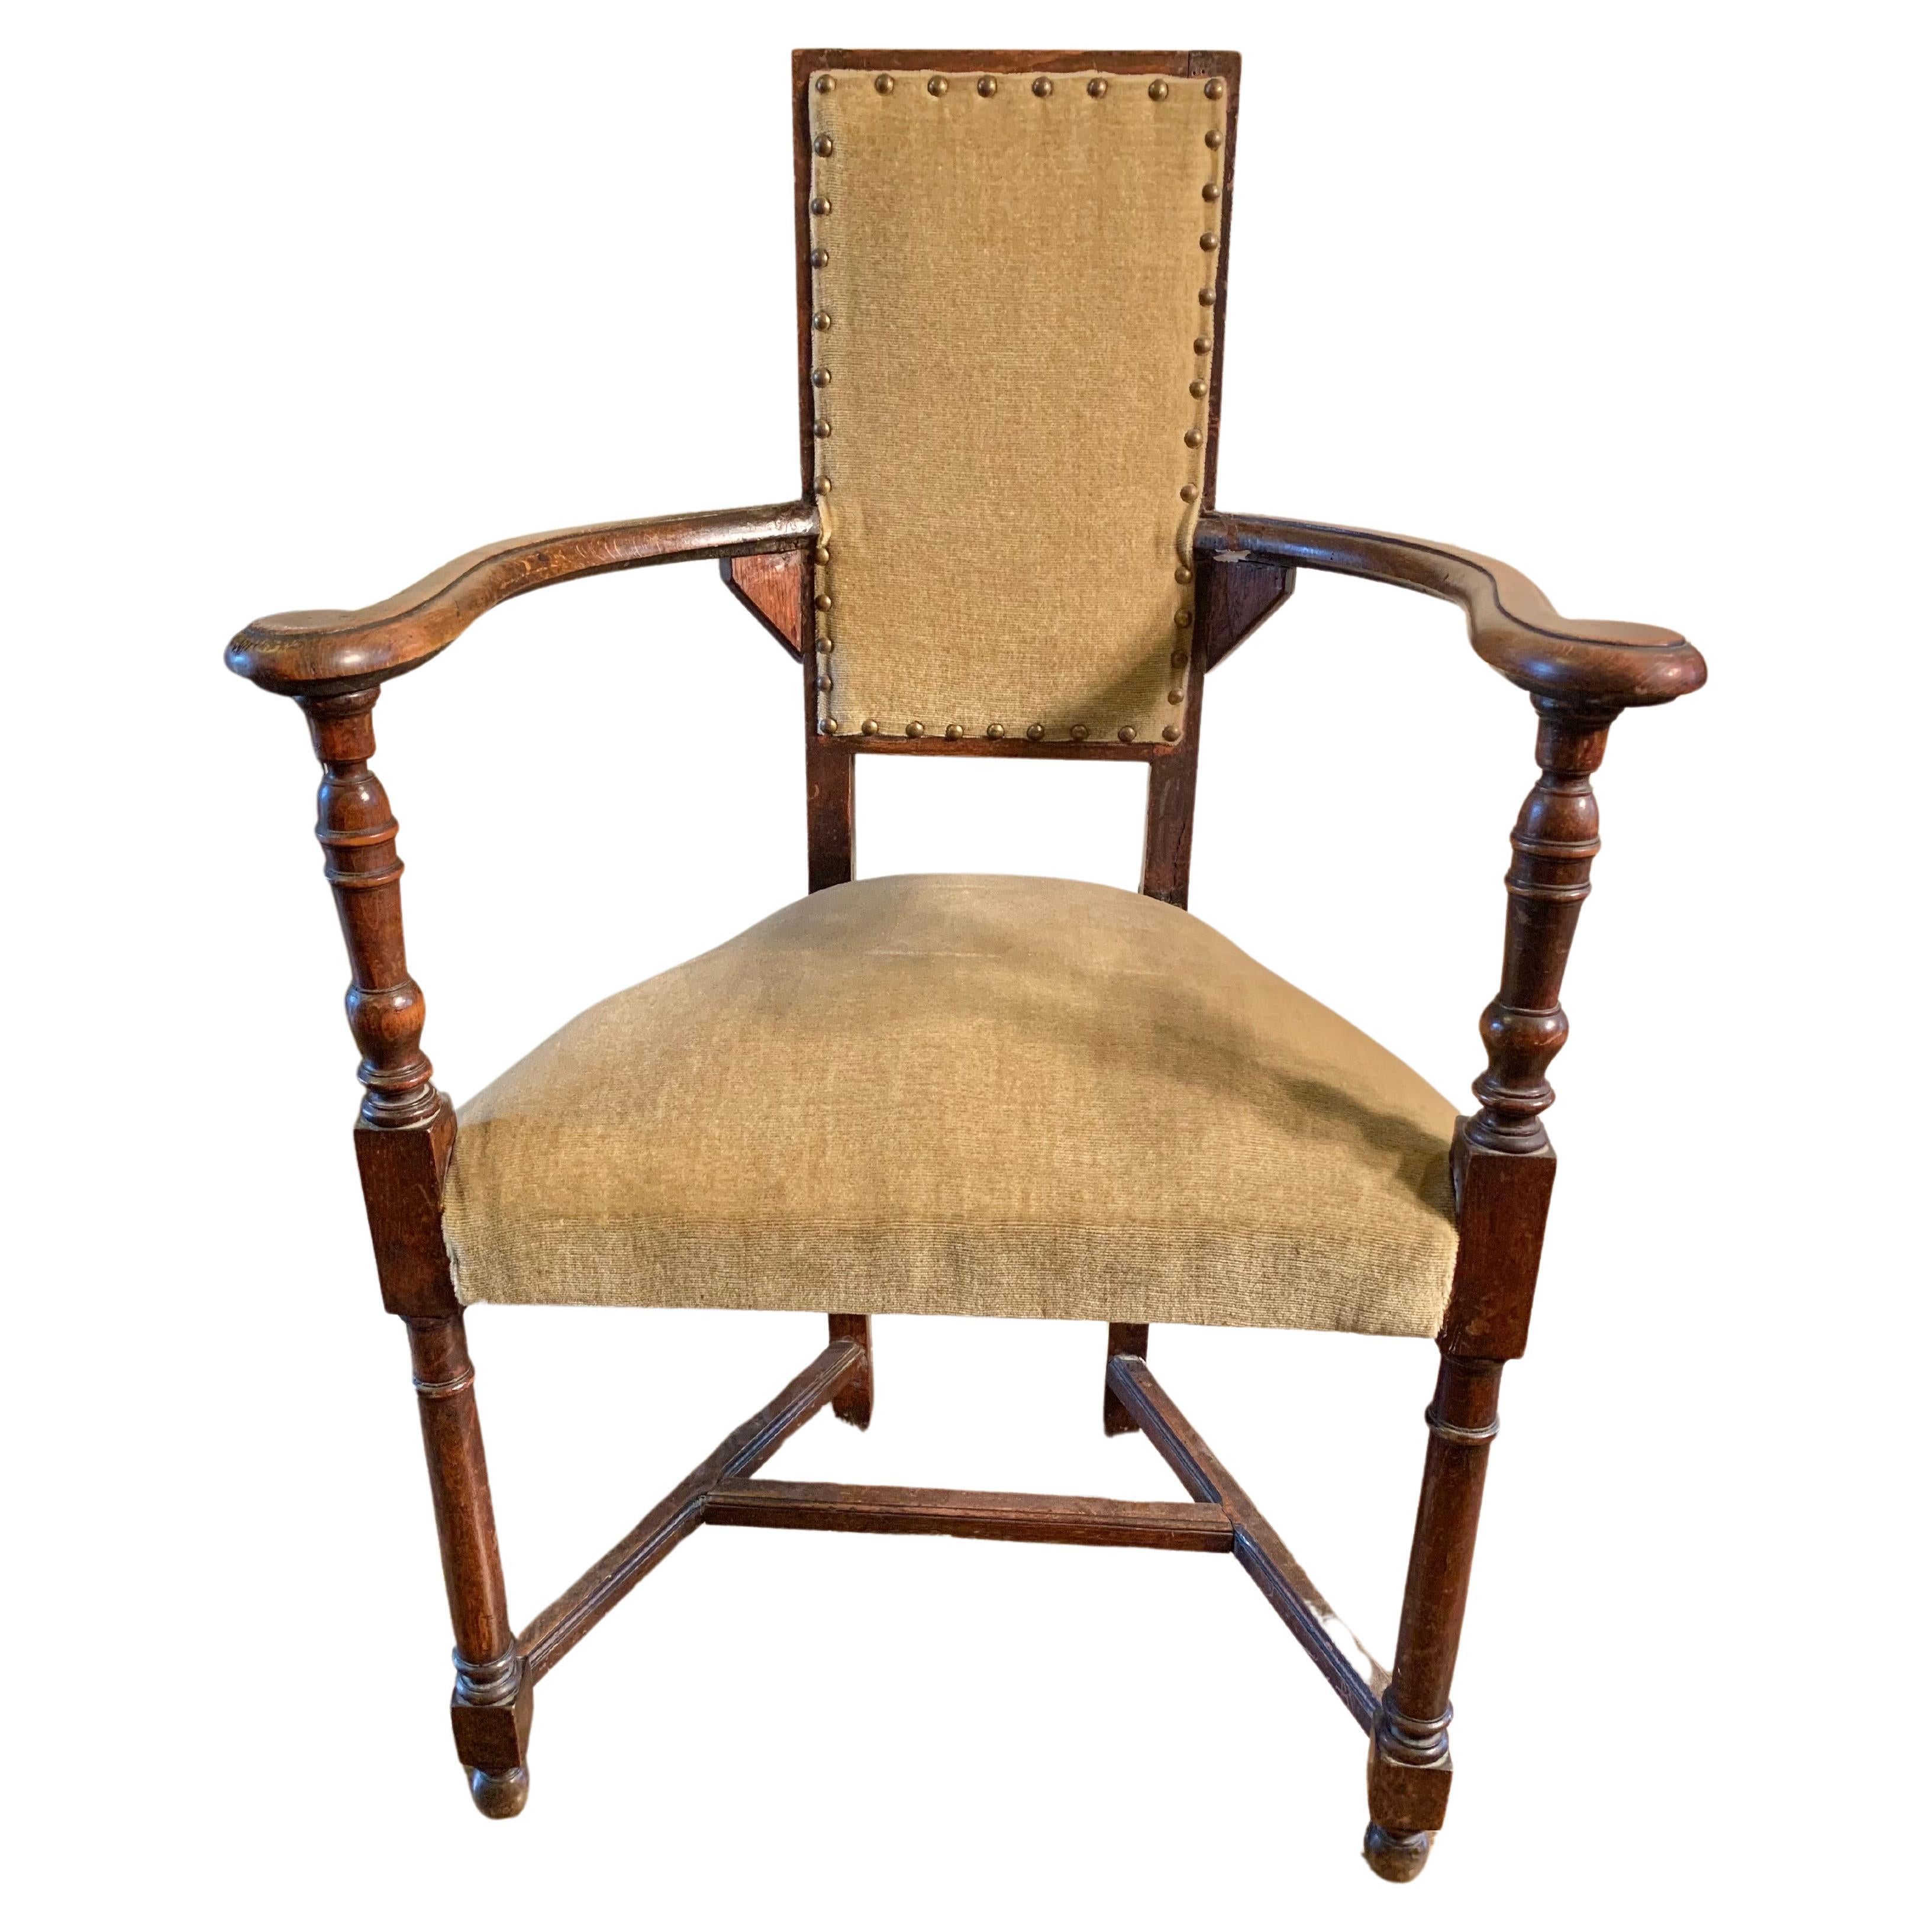 Found in the South of France, this 19th Century French Armchair was crafted from walnut in the mid 1800's. Presented as found in it's original upholstery, the piece features hand carved wide set armrest that end in a slight scroll. The arms rest on